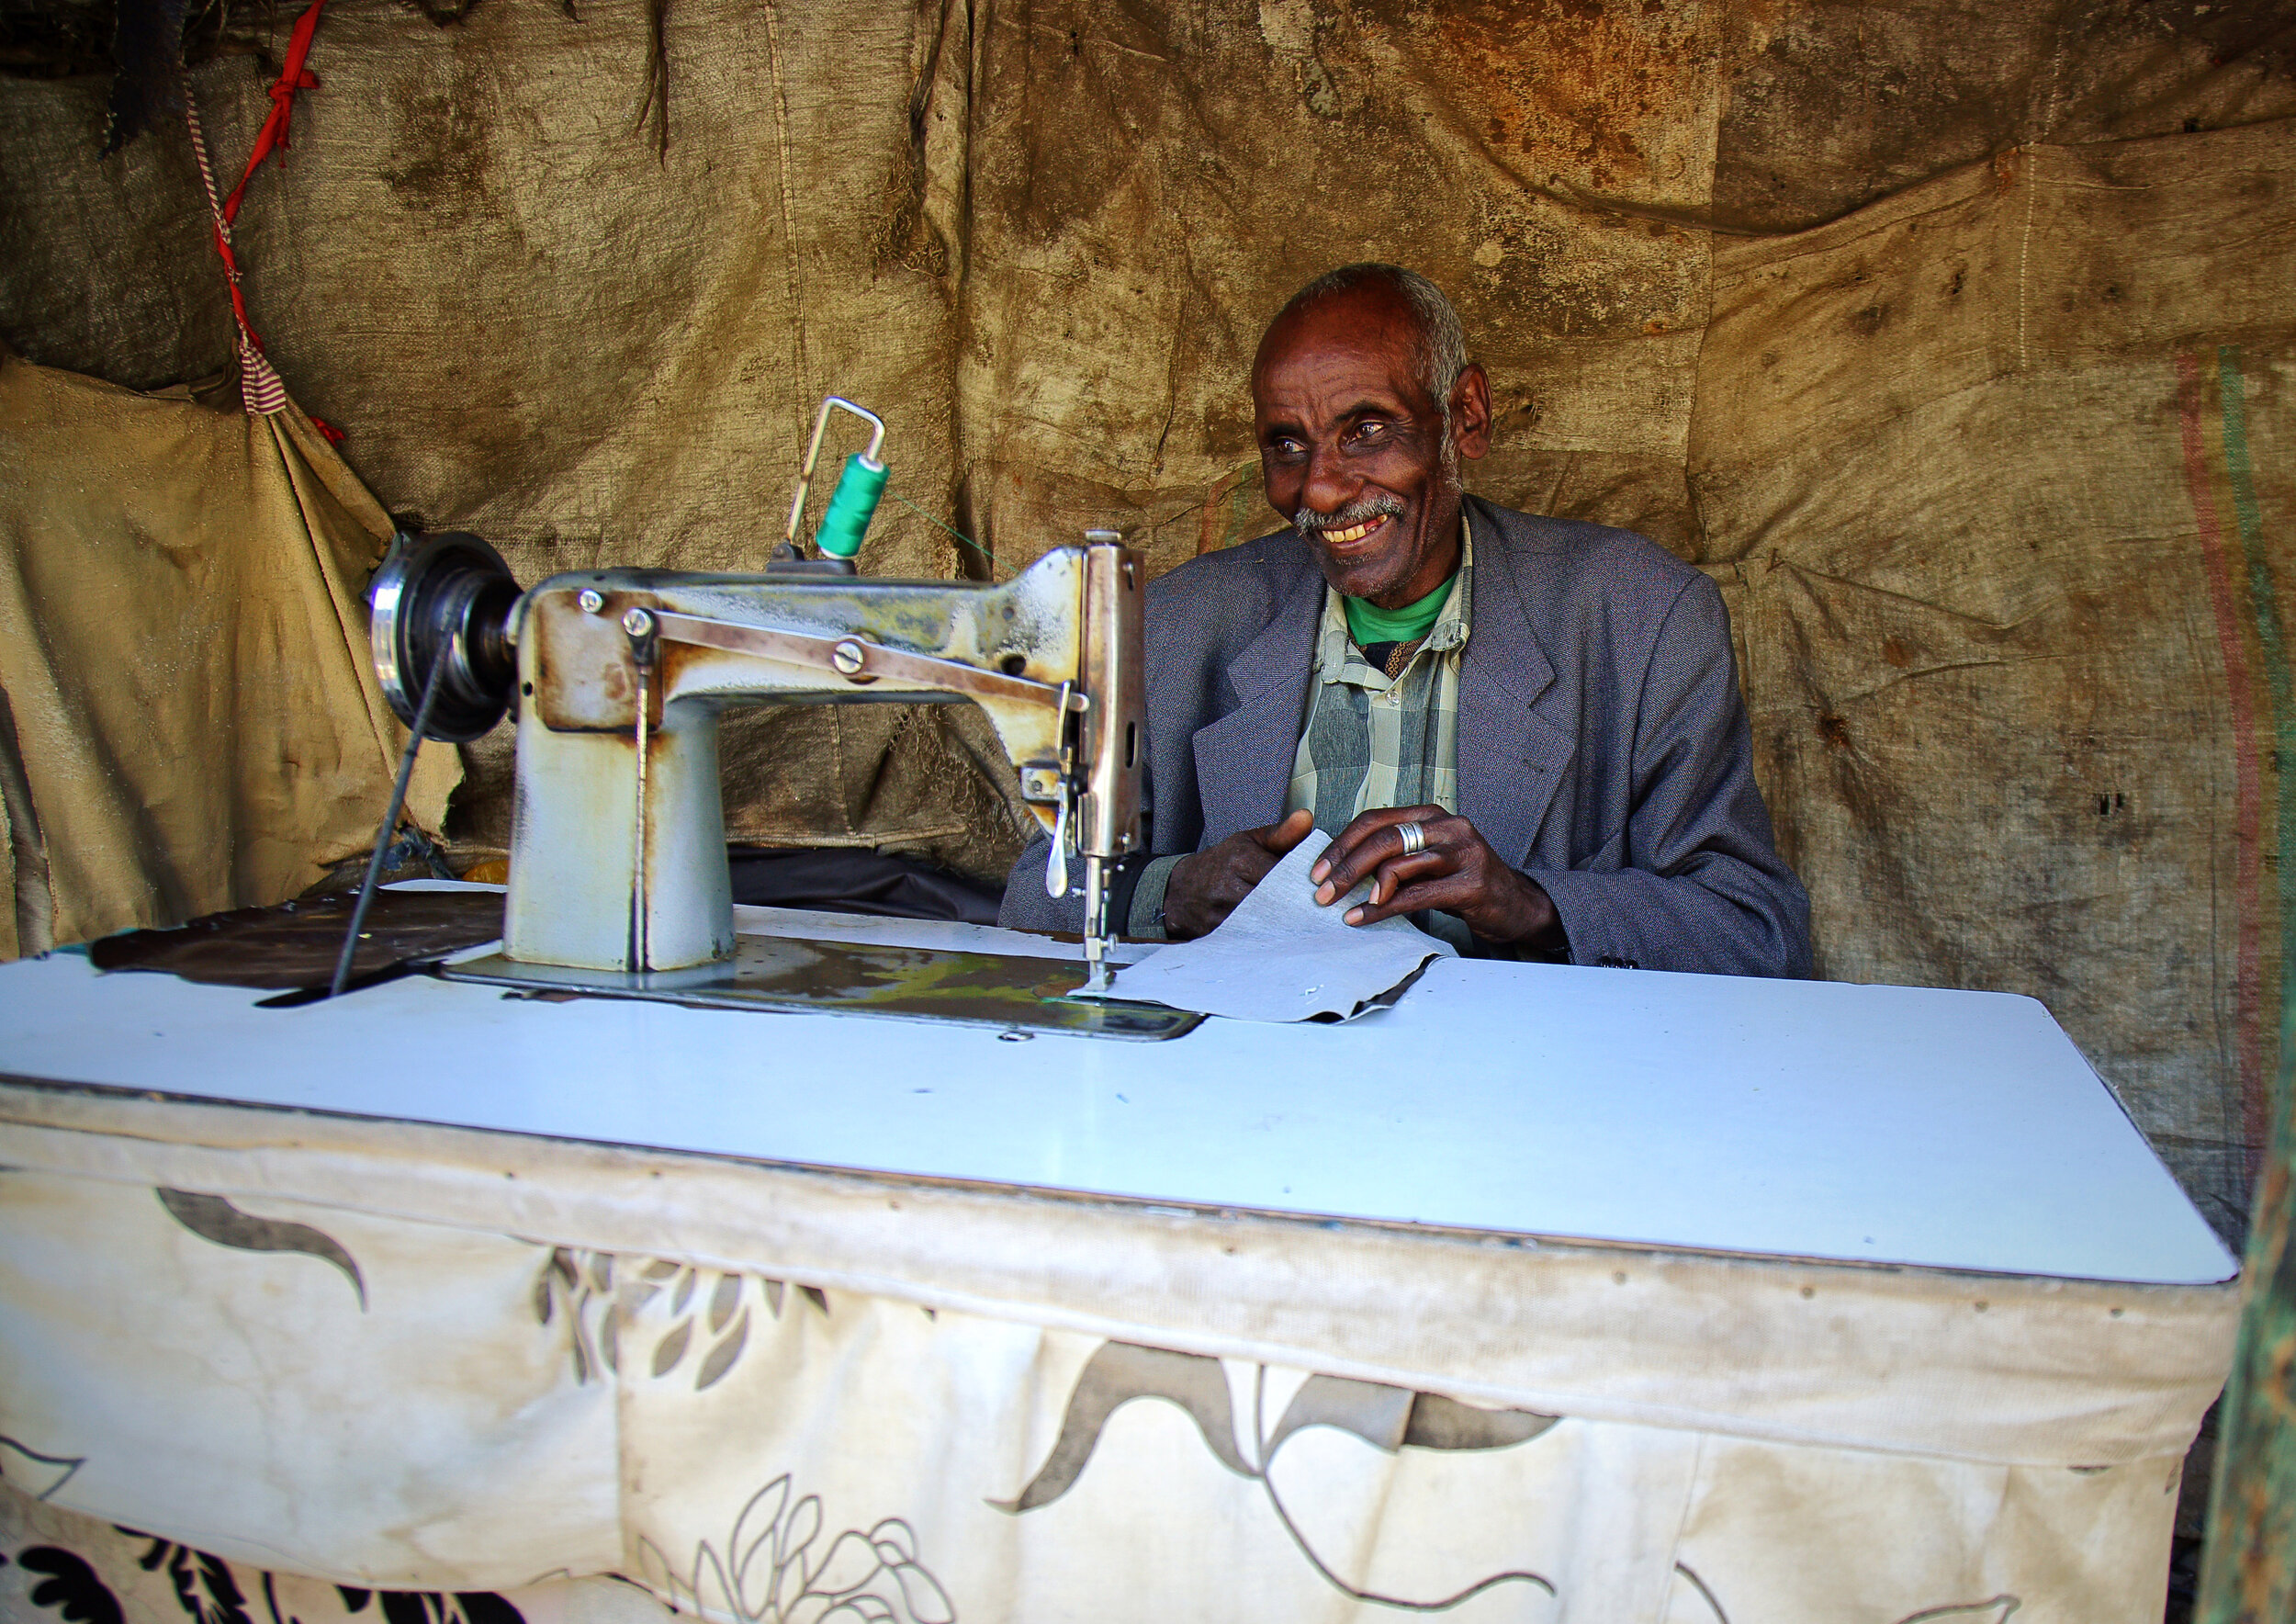  This tailor kept his business in the middle of the renewal area, even though he had to move his housing. It is challenging for people to reestablish their livelihoods elsewhere, as their livelihoods often rely on a neighborhood’s networks of people.